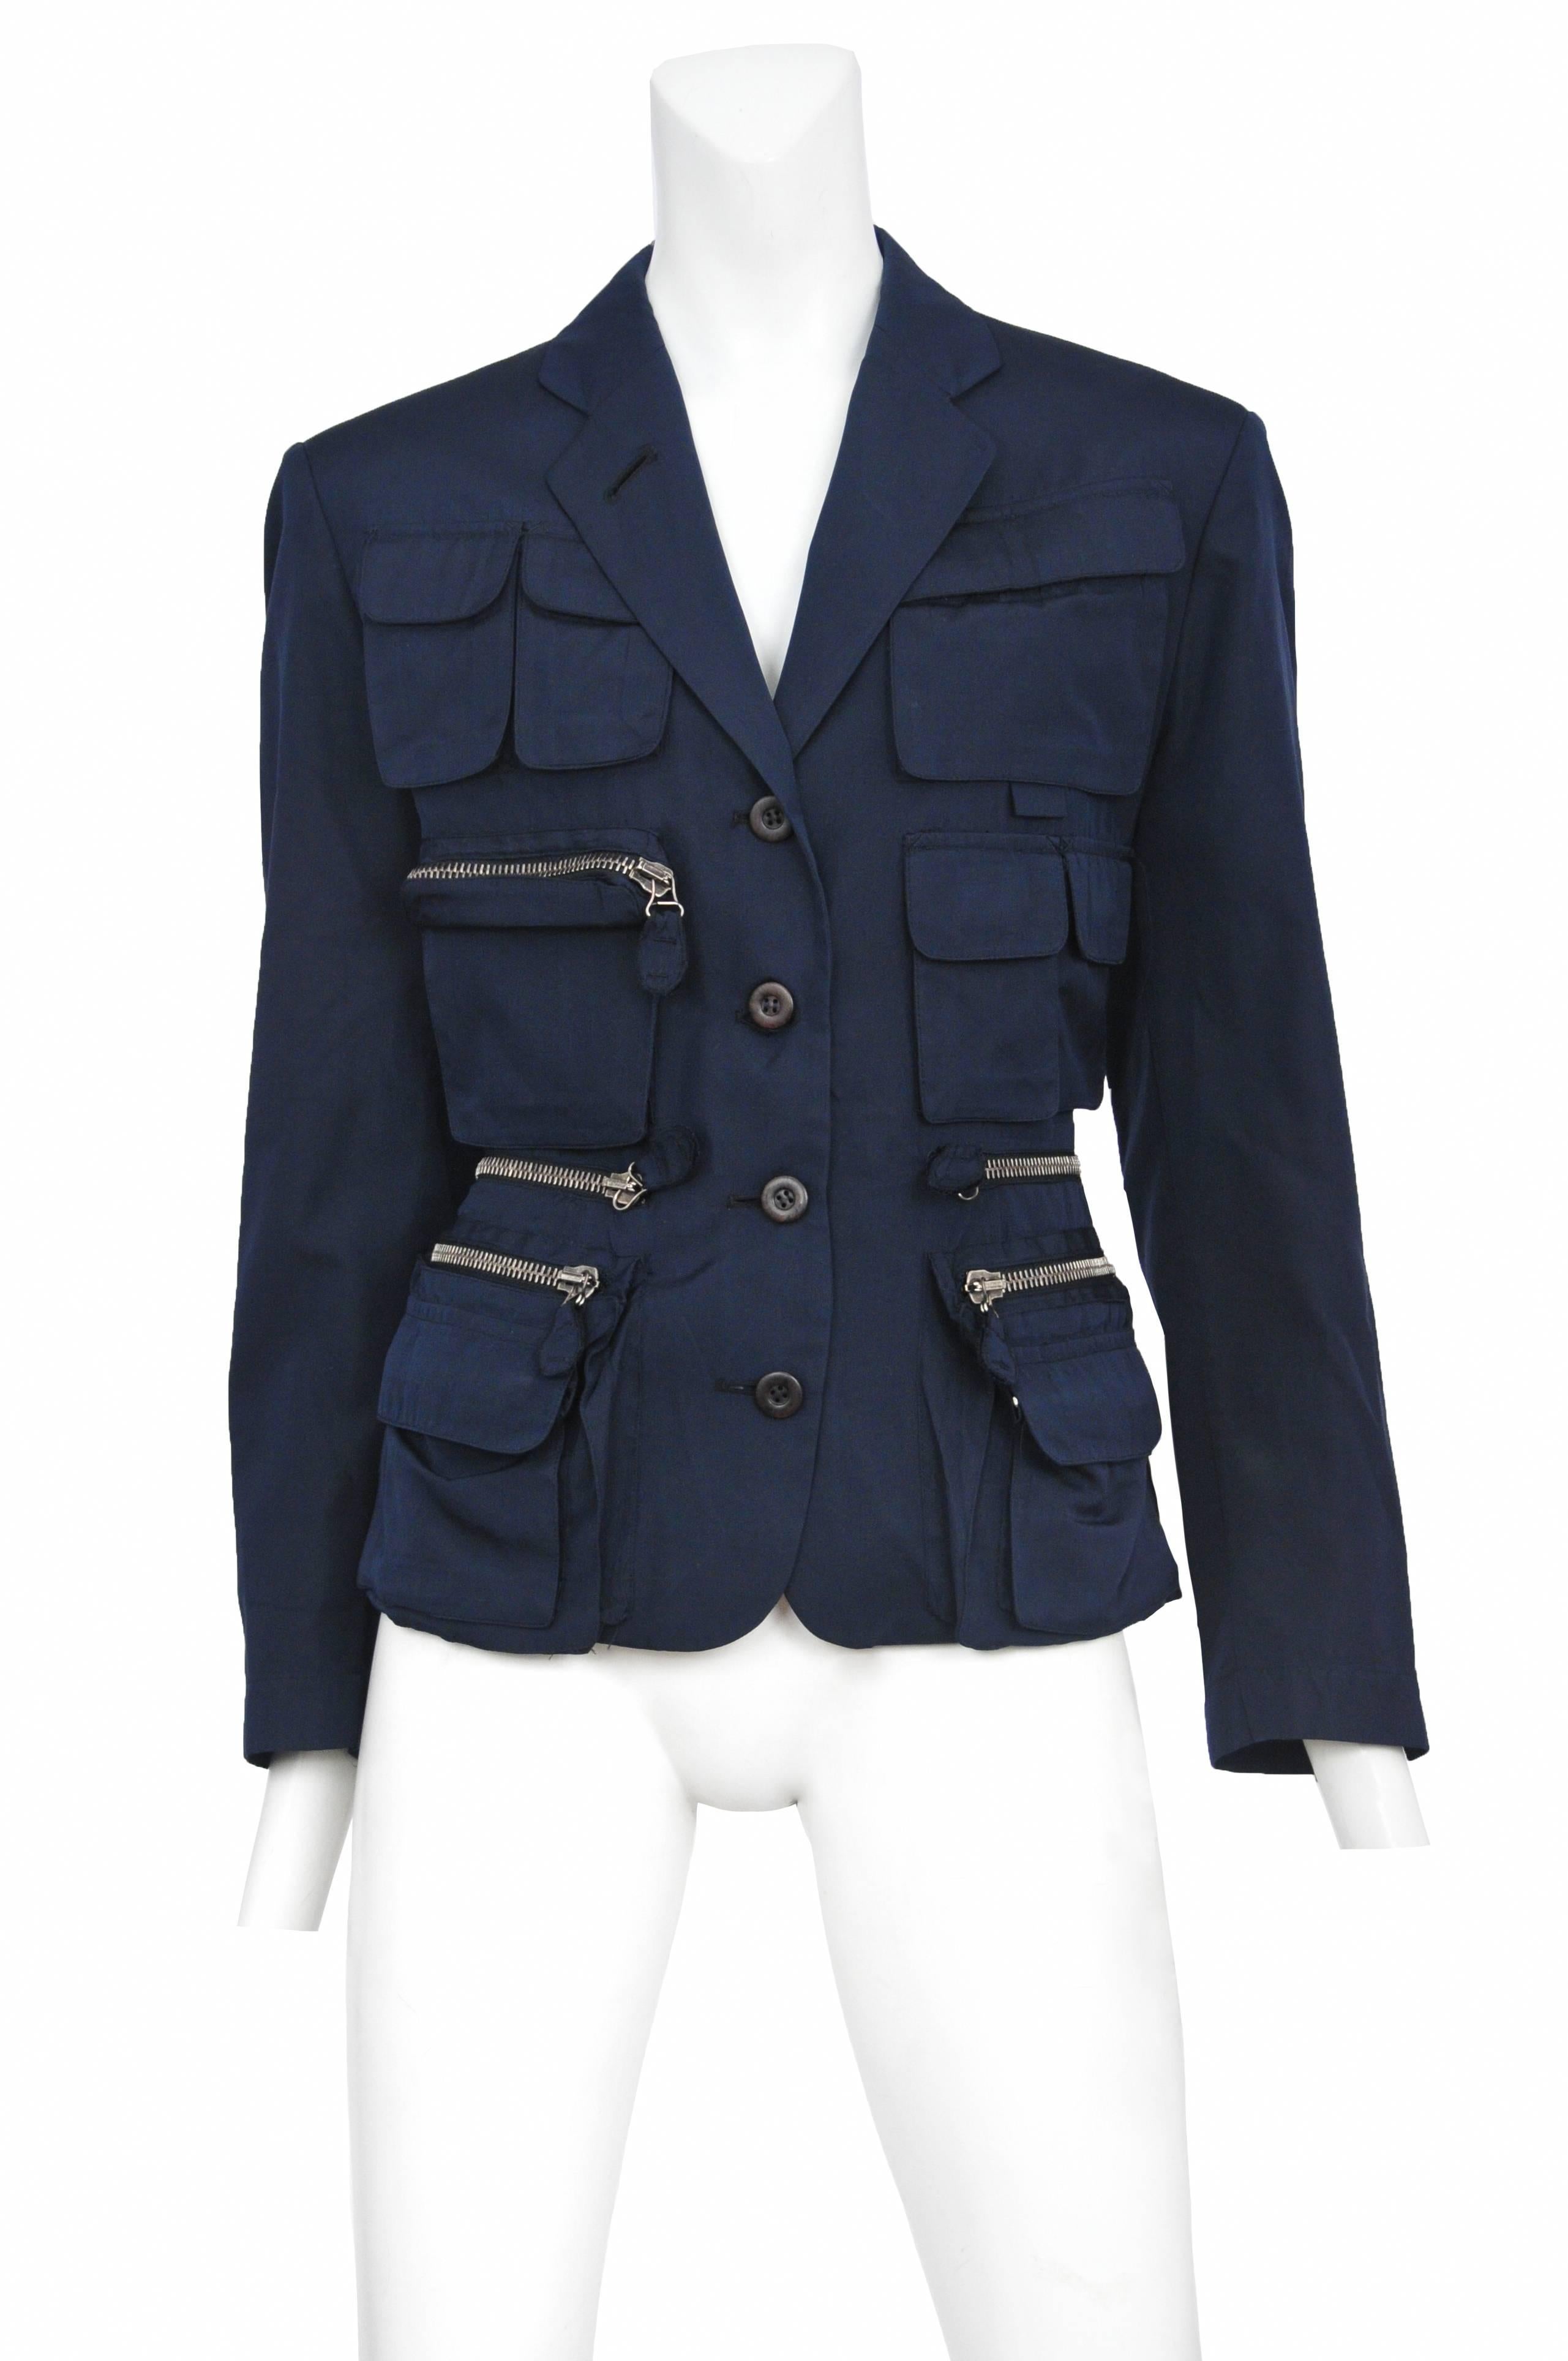 Vintage Jean Paul Gaultier blue utilitarian 4 button blazer featuring multi-sized pockets with and with out zippers covering the front torso and chest.

Please inquire for additional images.